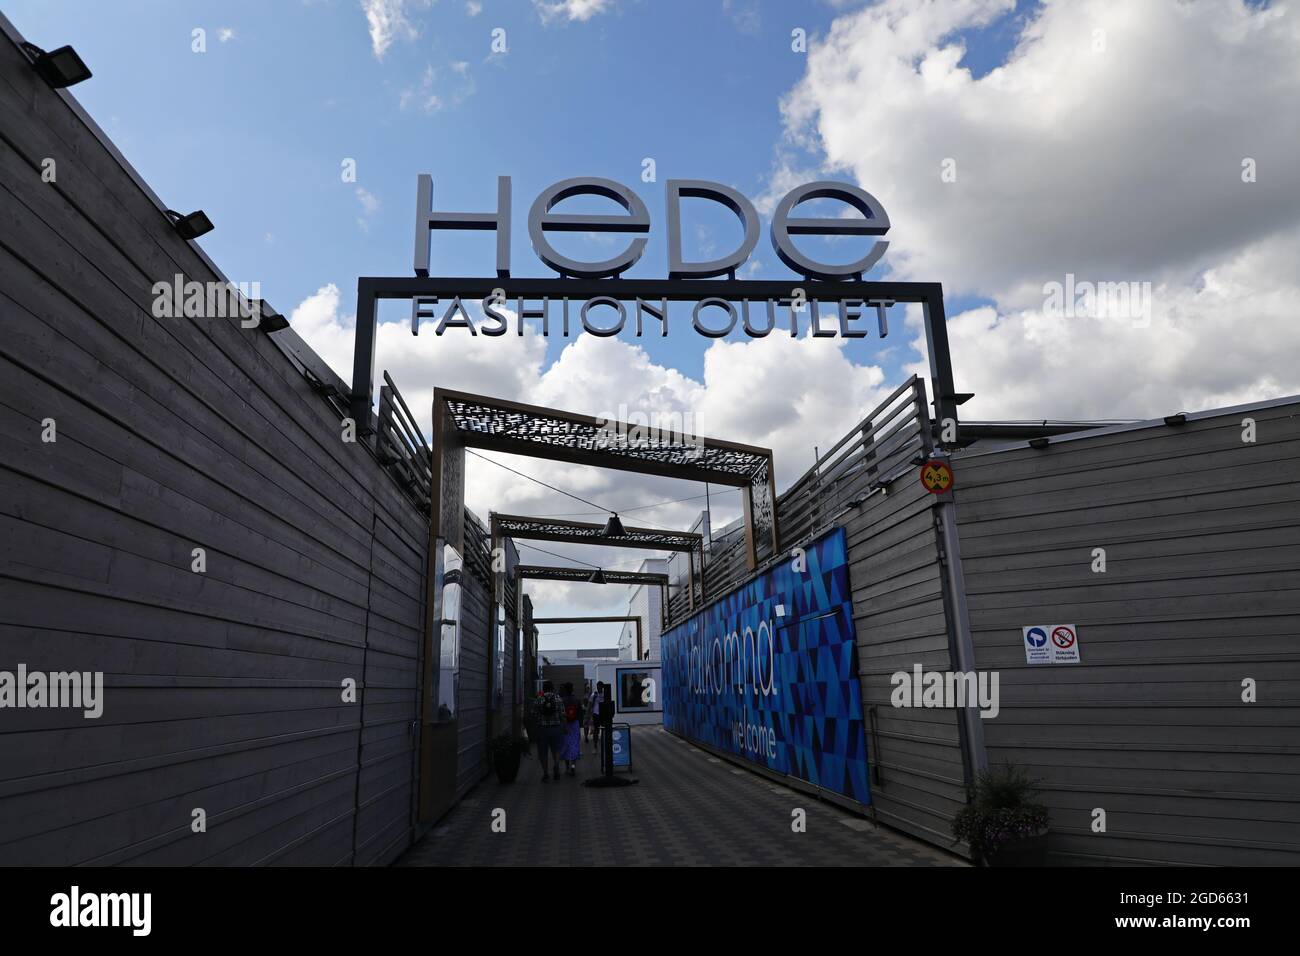 Hede Fashion Outlet Stock Photo - Alamy